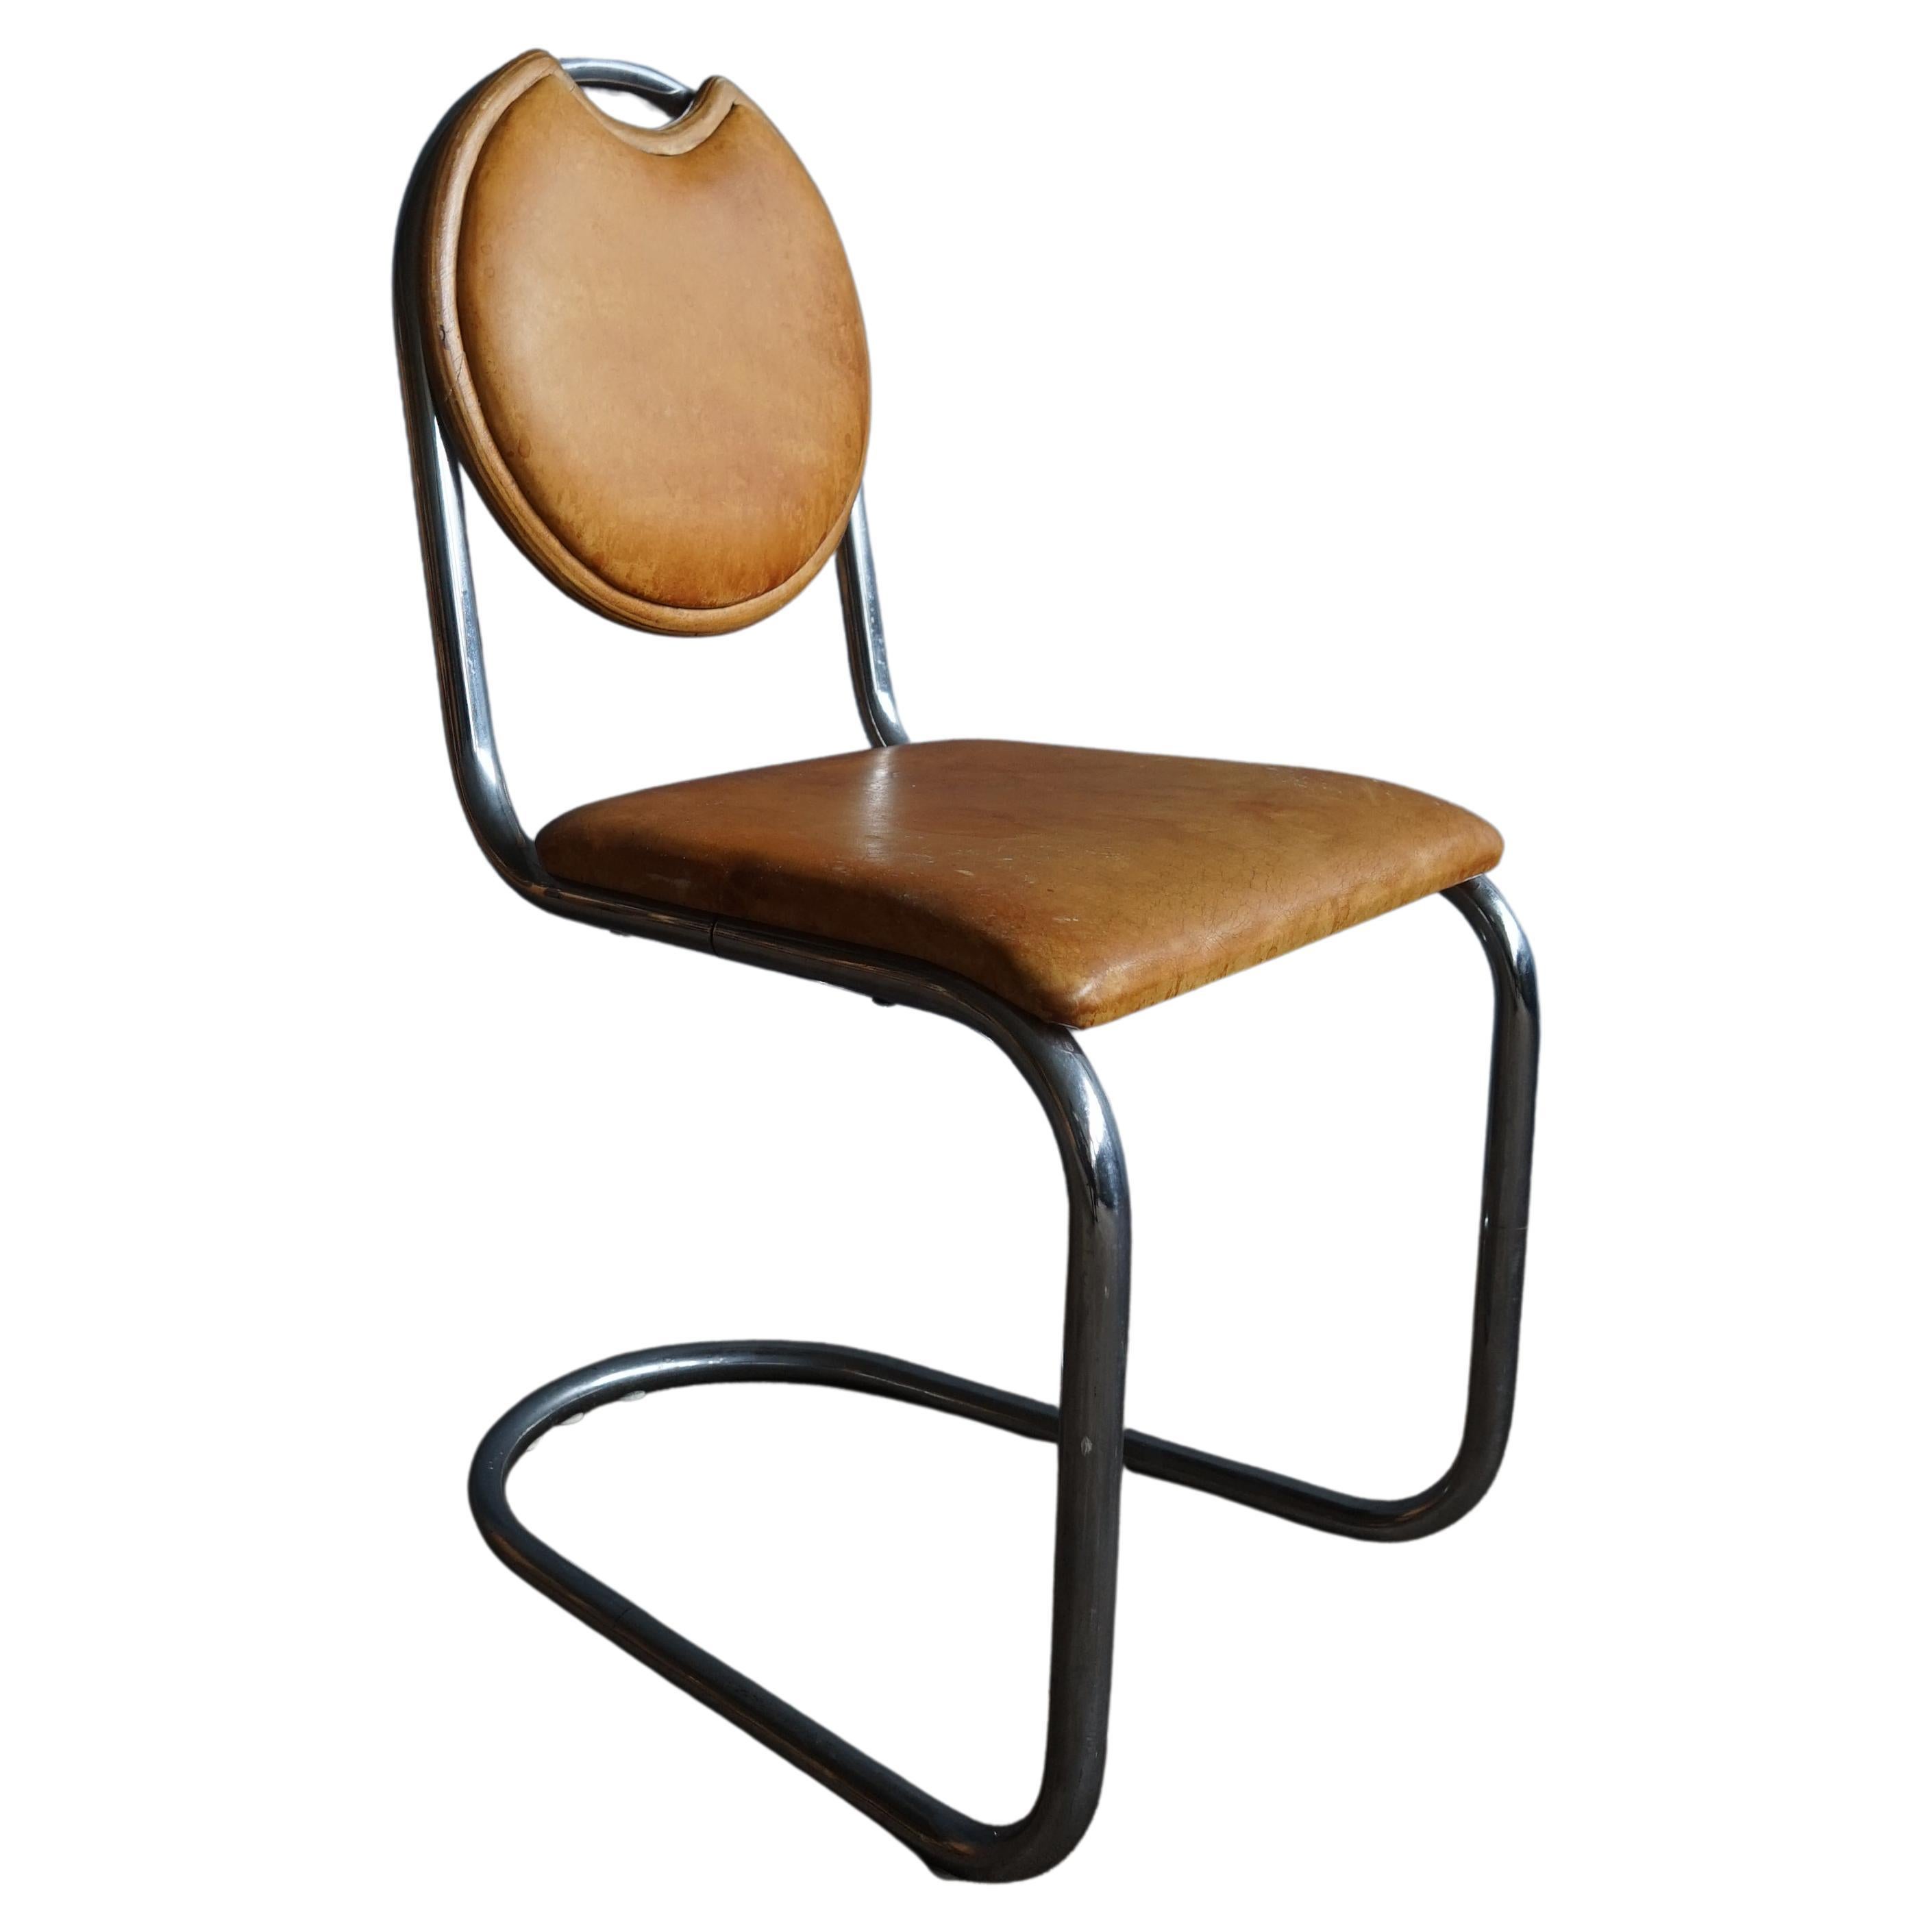 Steel Tube Chair Designed by Sven Markelius for Ds Staal Sweden, 1930s For Sale